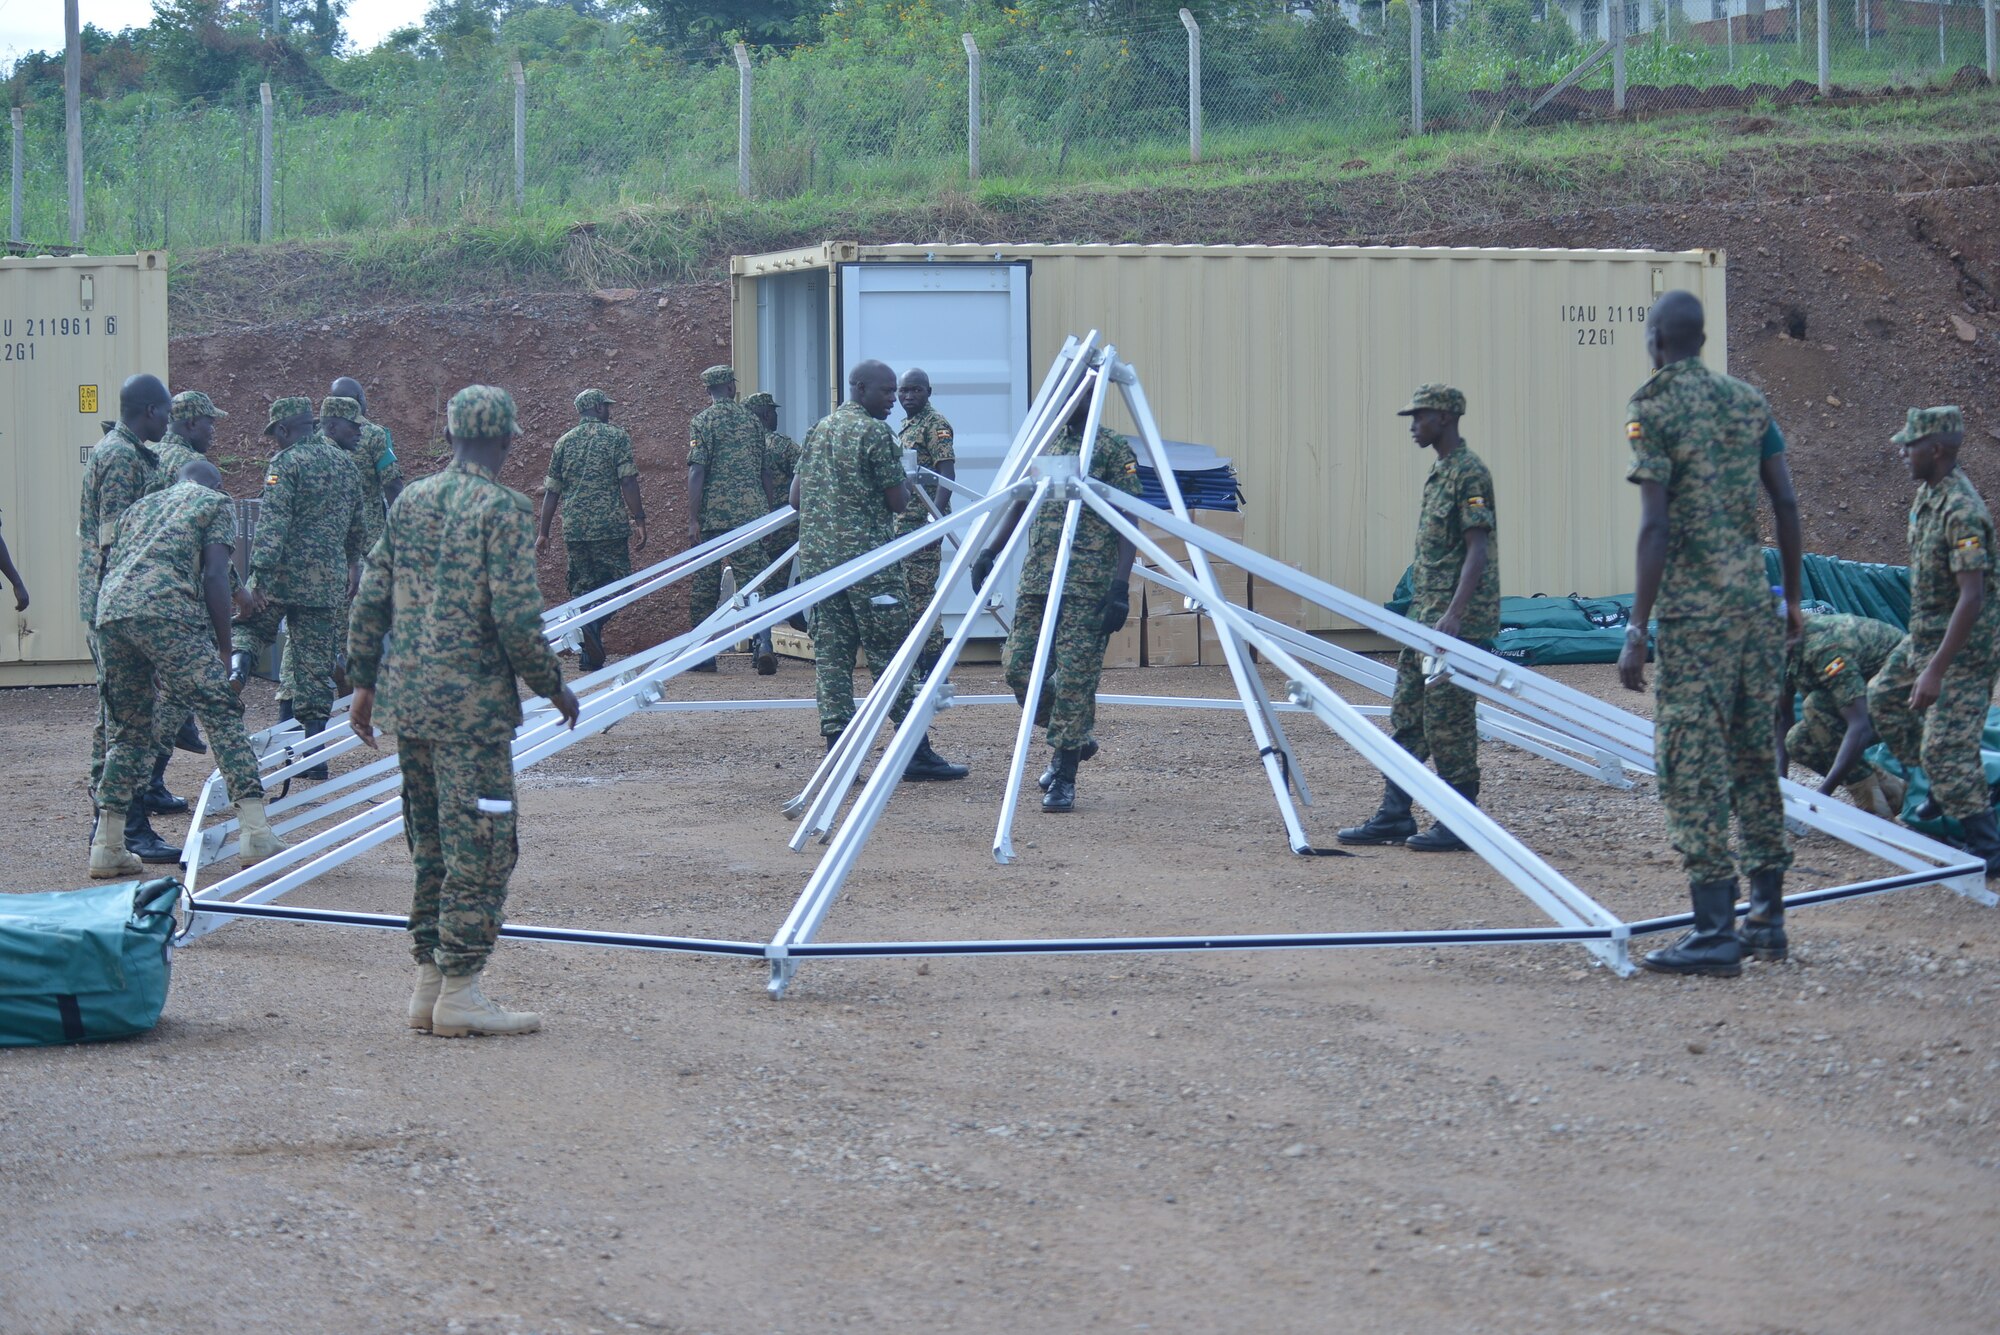 Image of Soldiers working and training.